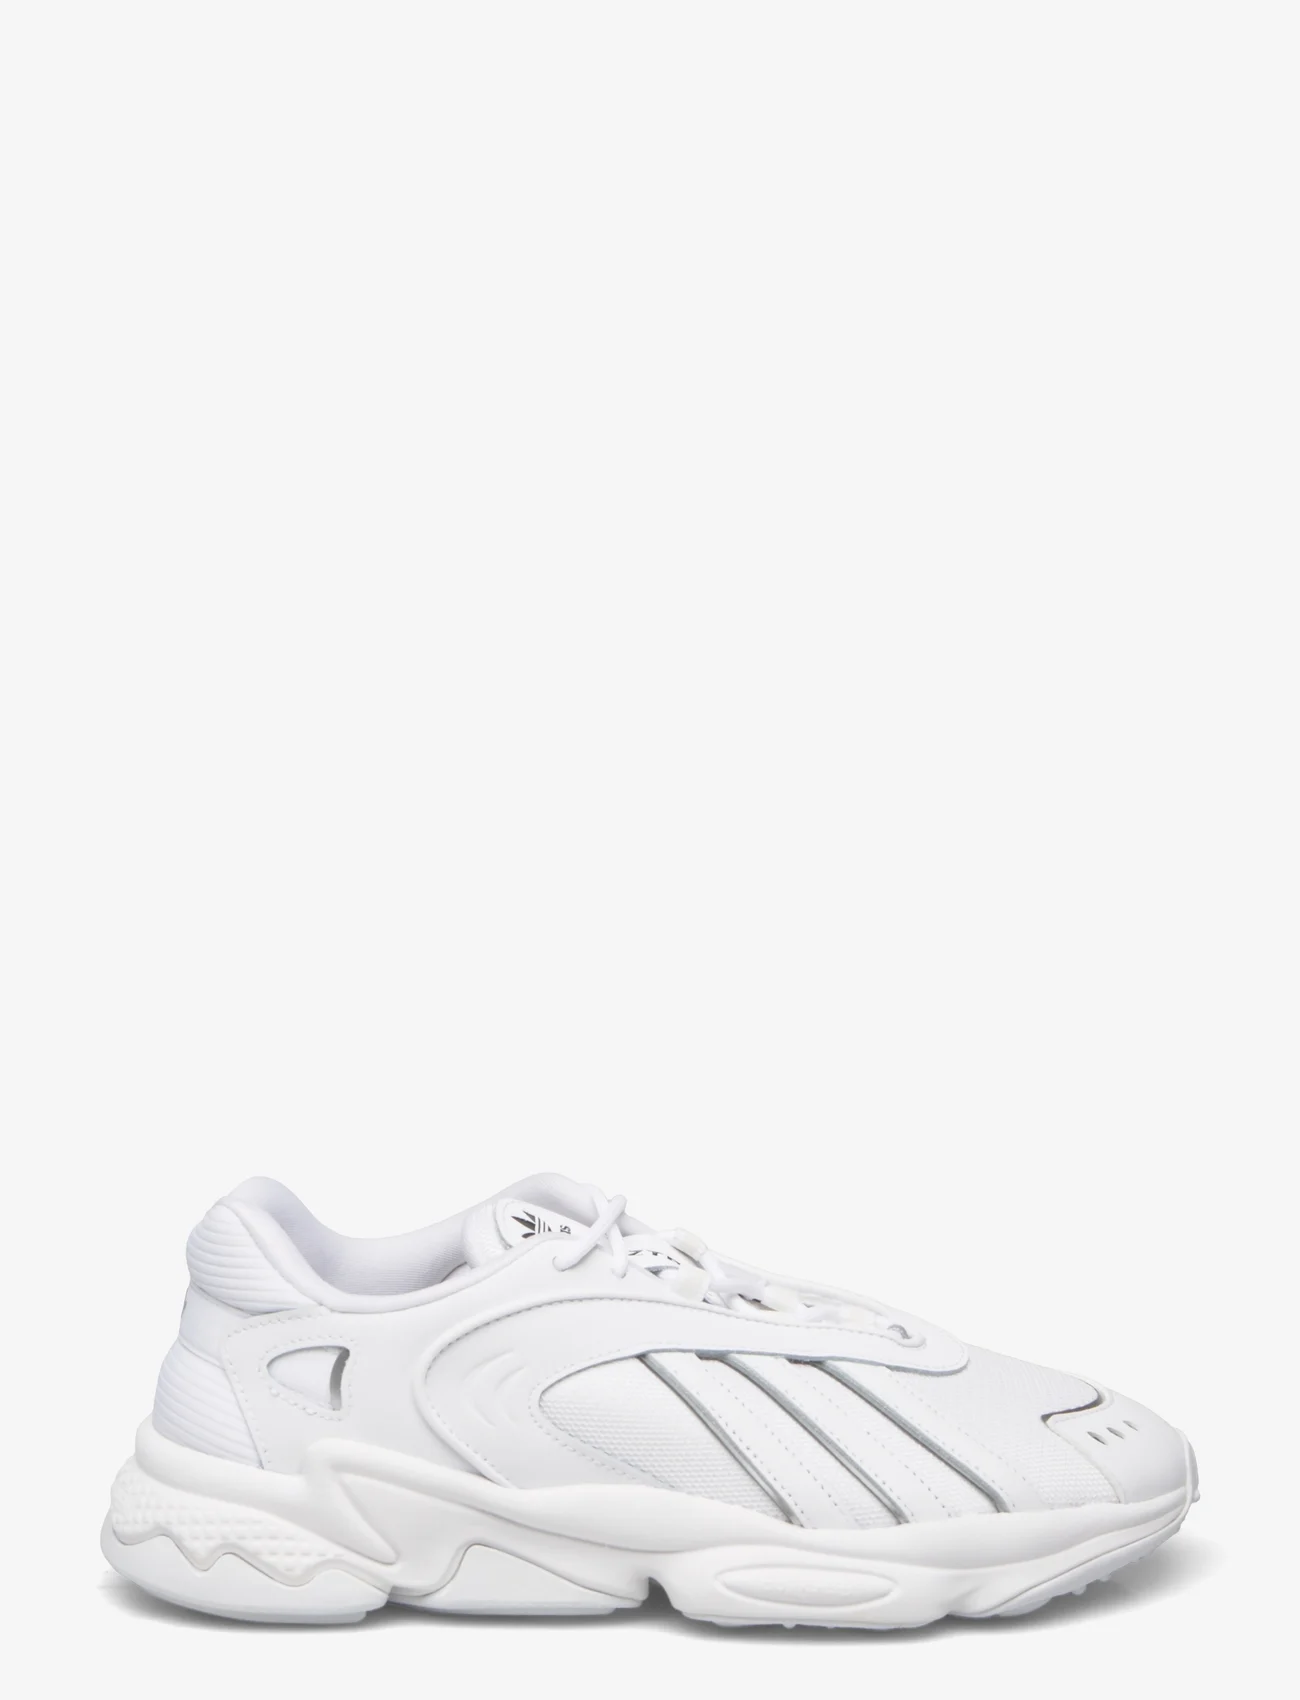 adidas Originals - OZTRAL - lave sneakers - ftwwht/ftwwht/msilve - 1